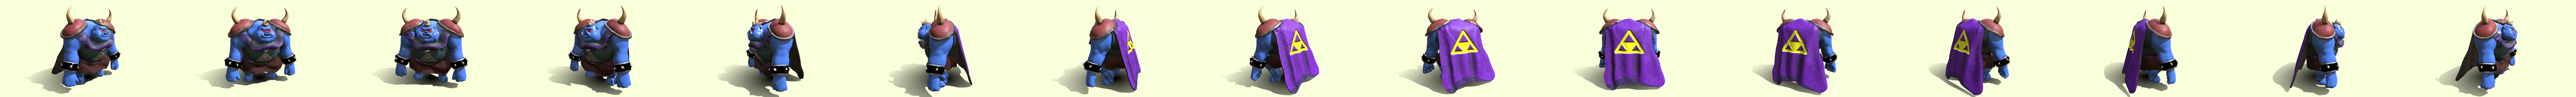 a link between worlds 3D Models to Print - yeggi